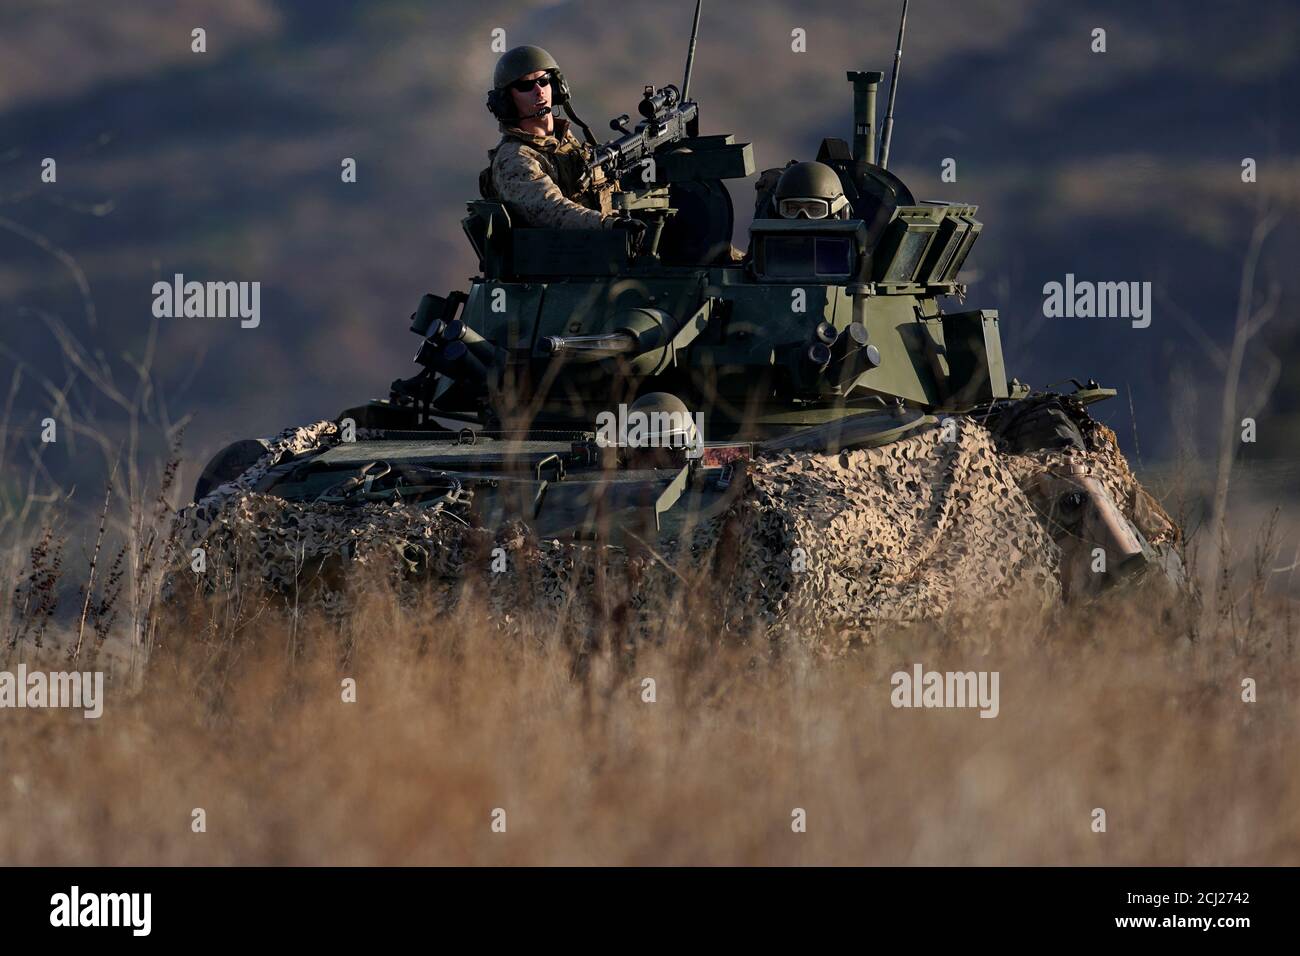 Marines from the 1st Marine Division secure the perimeter of a landing zone as they participate in 'Exercise Steel Knight' comprising of approximately 13,000 personnel include critical combat and combat service support elements from across I Marine Expeditionary Force (MEF) at Camp Pendleton, California, U.S., December 6, 2019.   REUTERS/Mike Blake Stock Photo